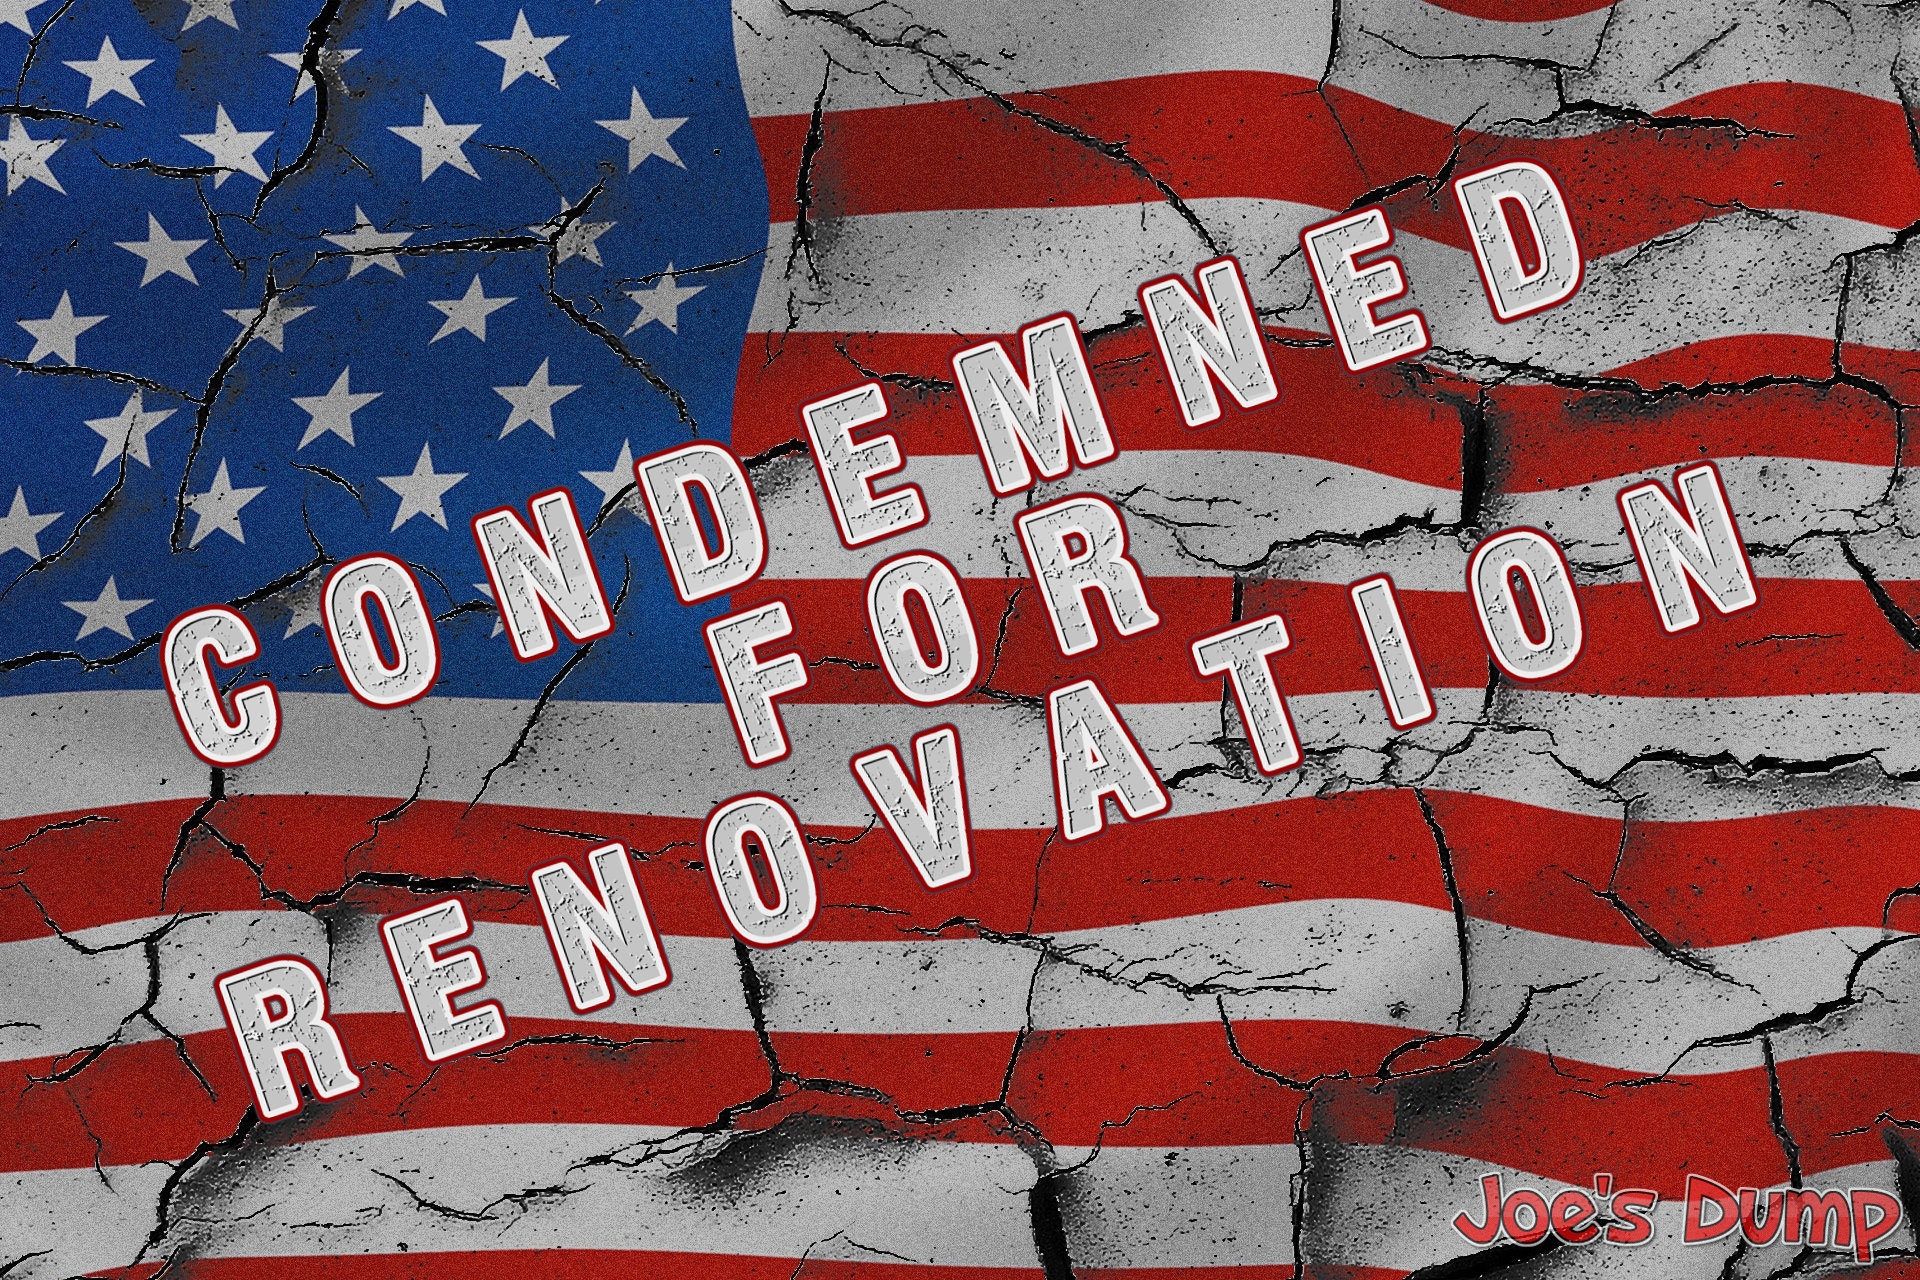 America: Condemned for Renovation